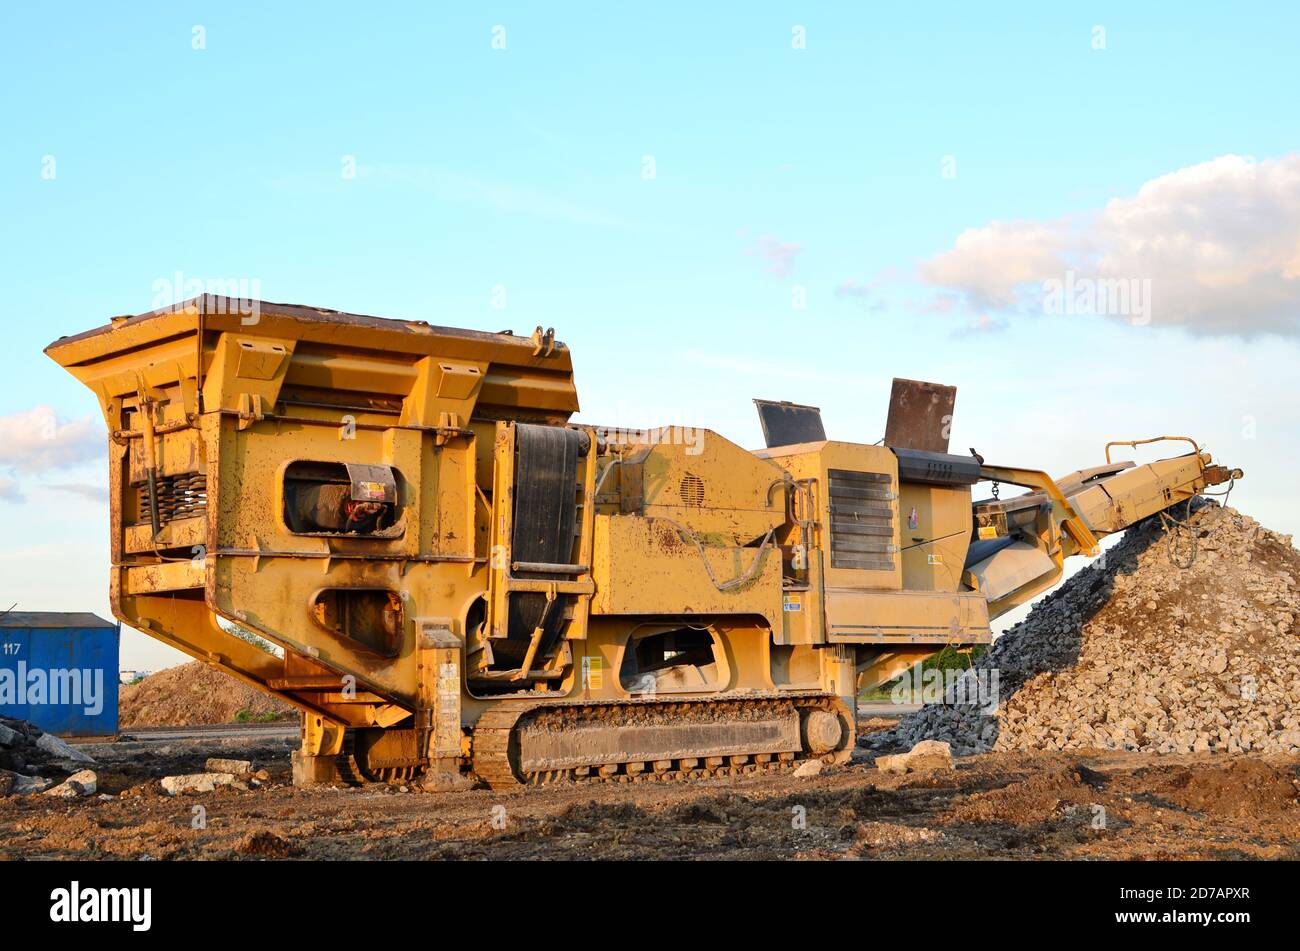 https://c8.alamy.com/comp/2D7APXR/mobile-stone-crusher-machine-by-the-construction-site-or-mining-quarry-for-crushing-old-concrete-slabs-into-gravel-and-subsequent-cement-production-2D7APXR.jpg